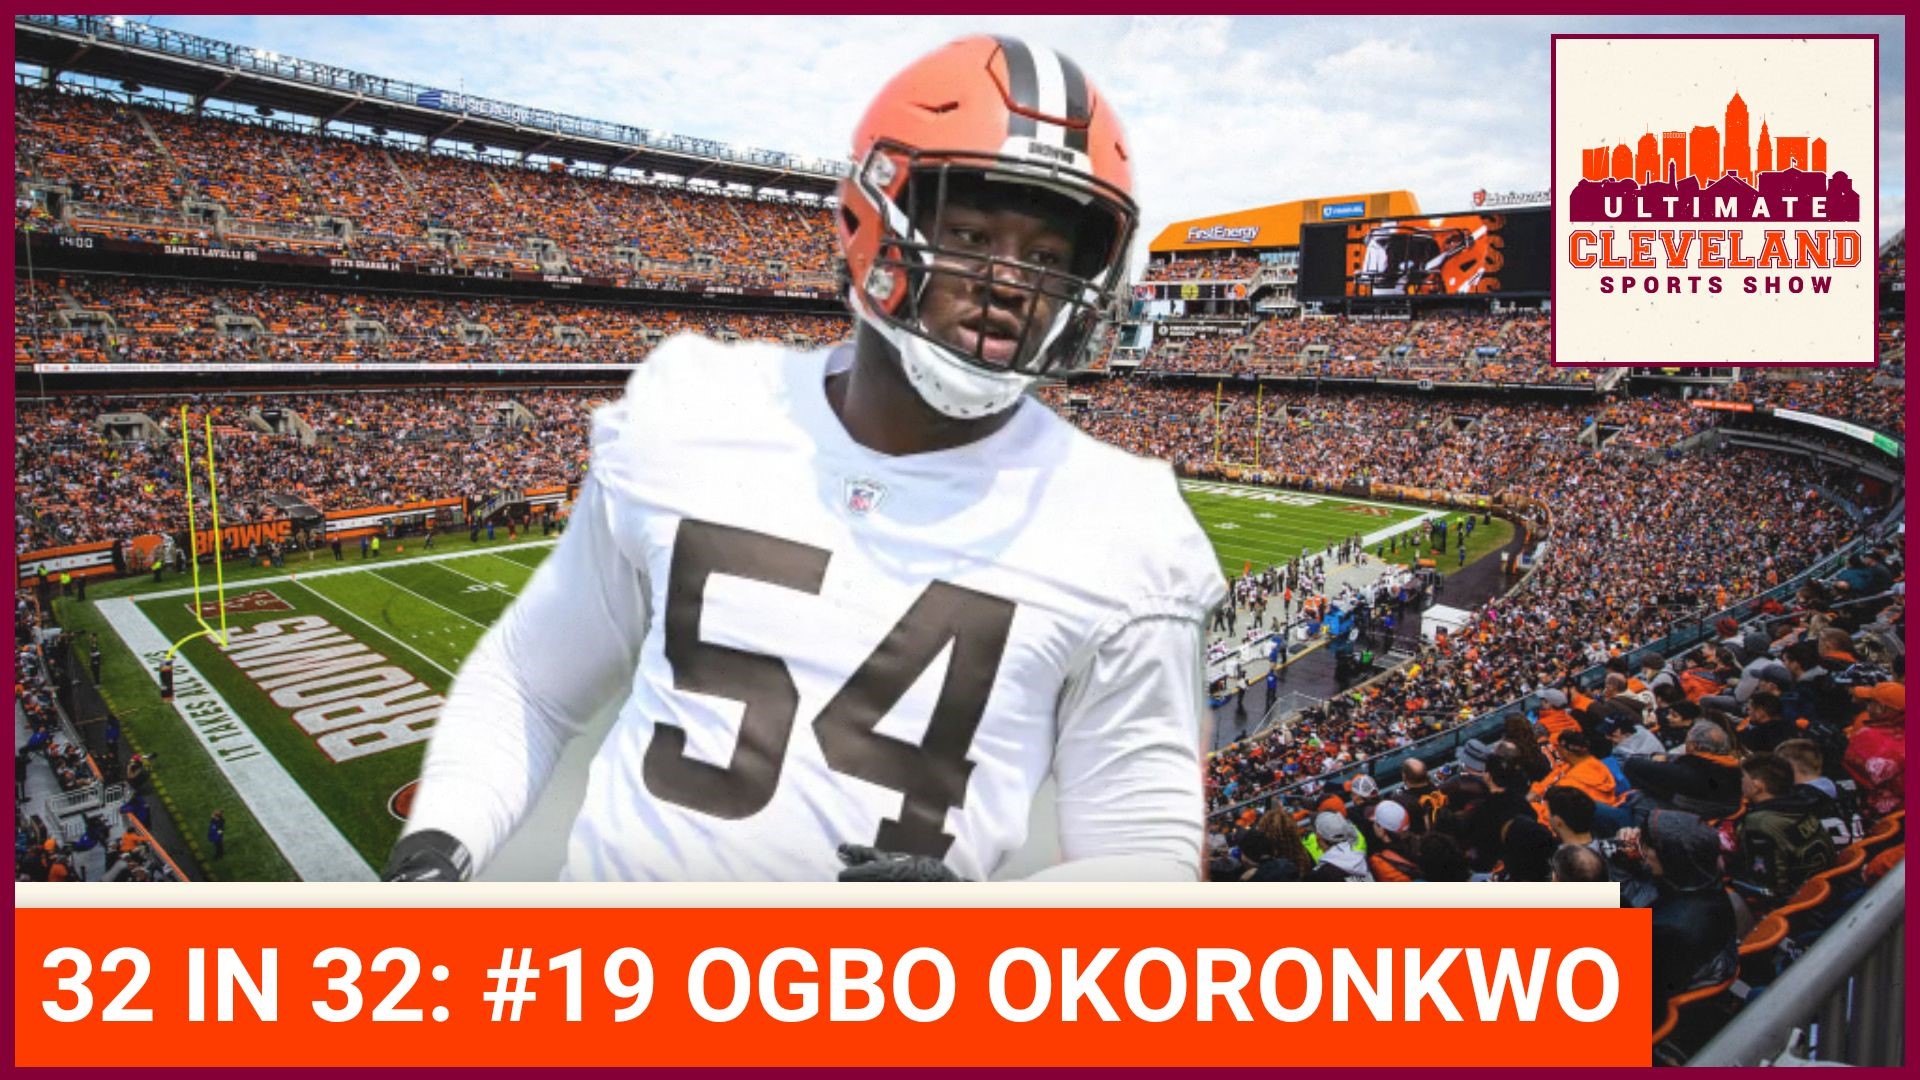 How will Ogbo Okoronkwo impact the Cleveland Browns in his first season  with the team?